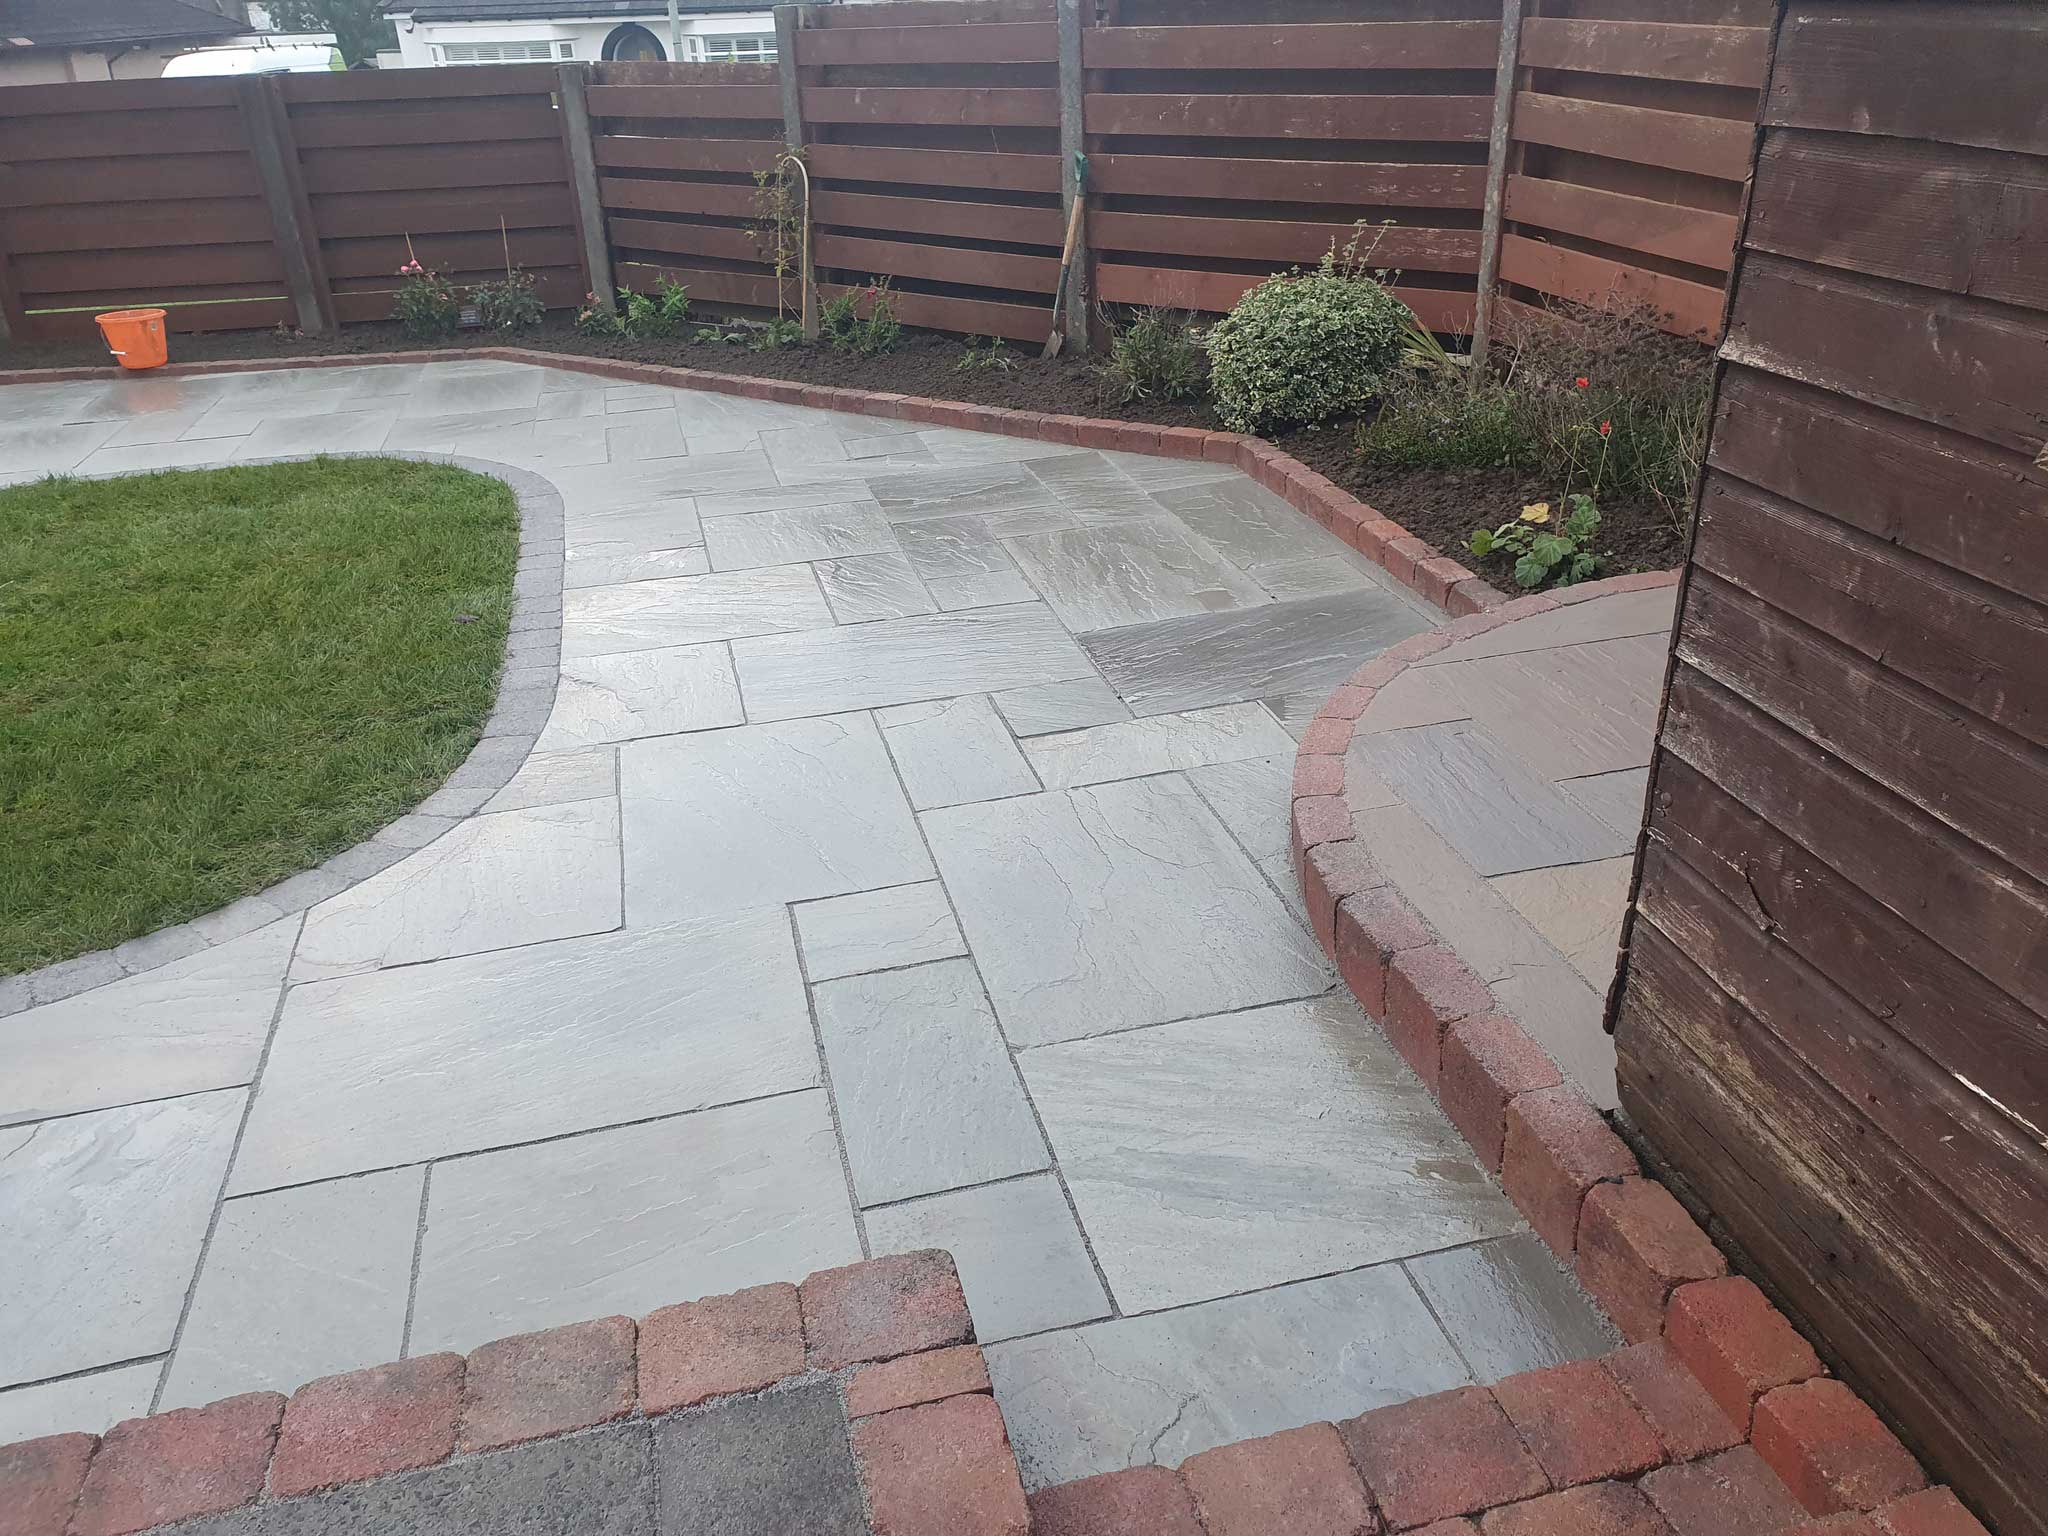 Landscaping specialists in Glasgow